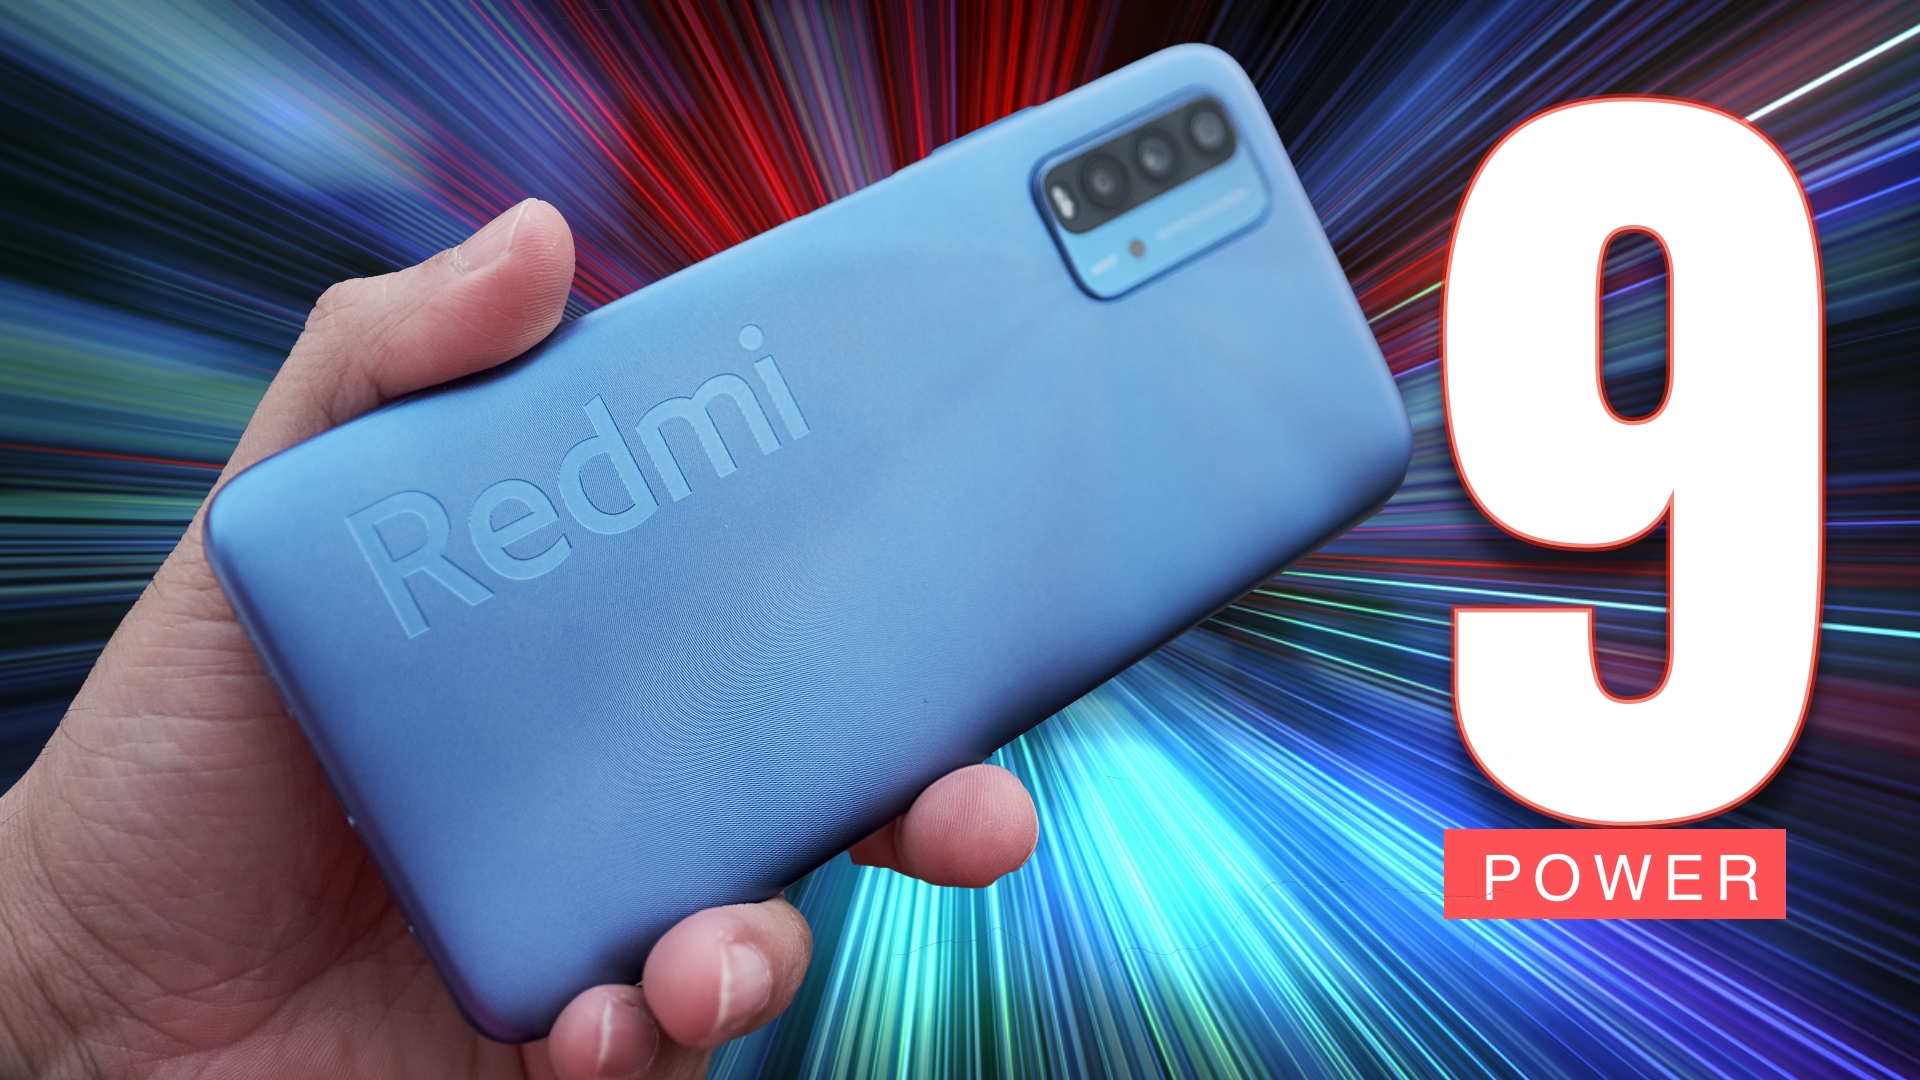 Redmi 9 Power review – 6000 mAh battery, SD 662, priced Rs. 10,999